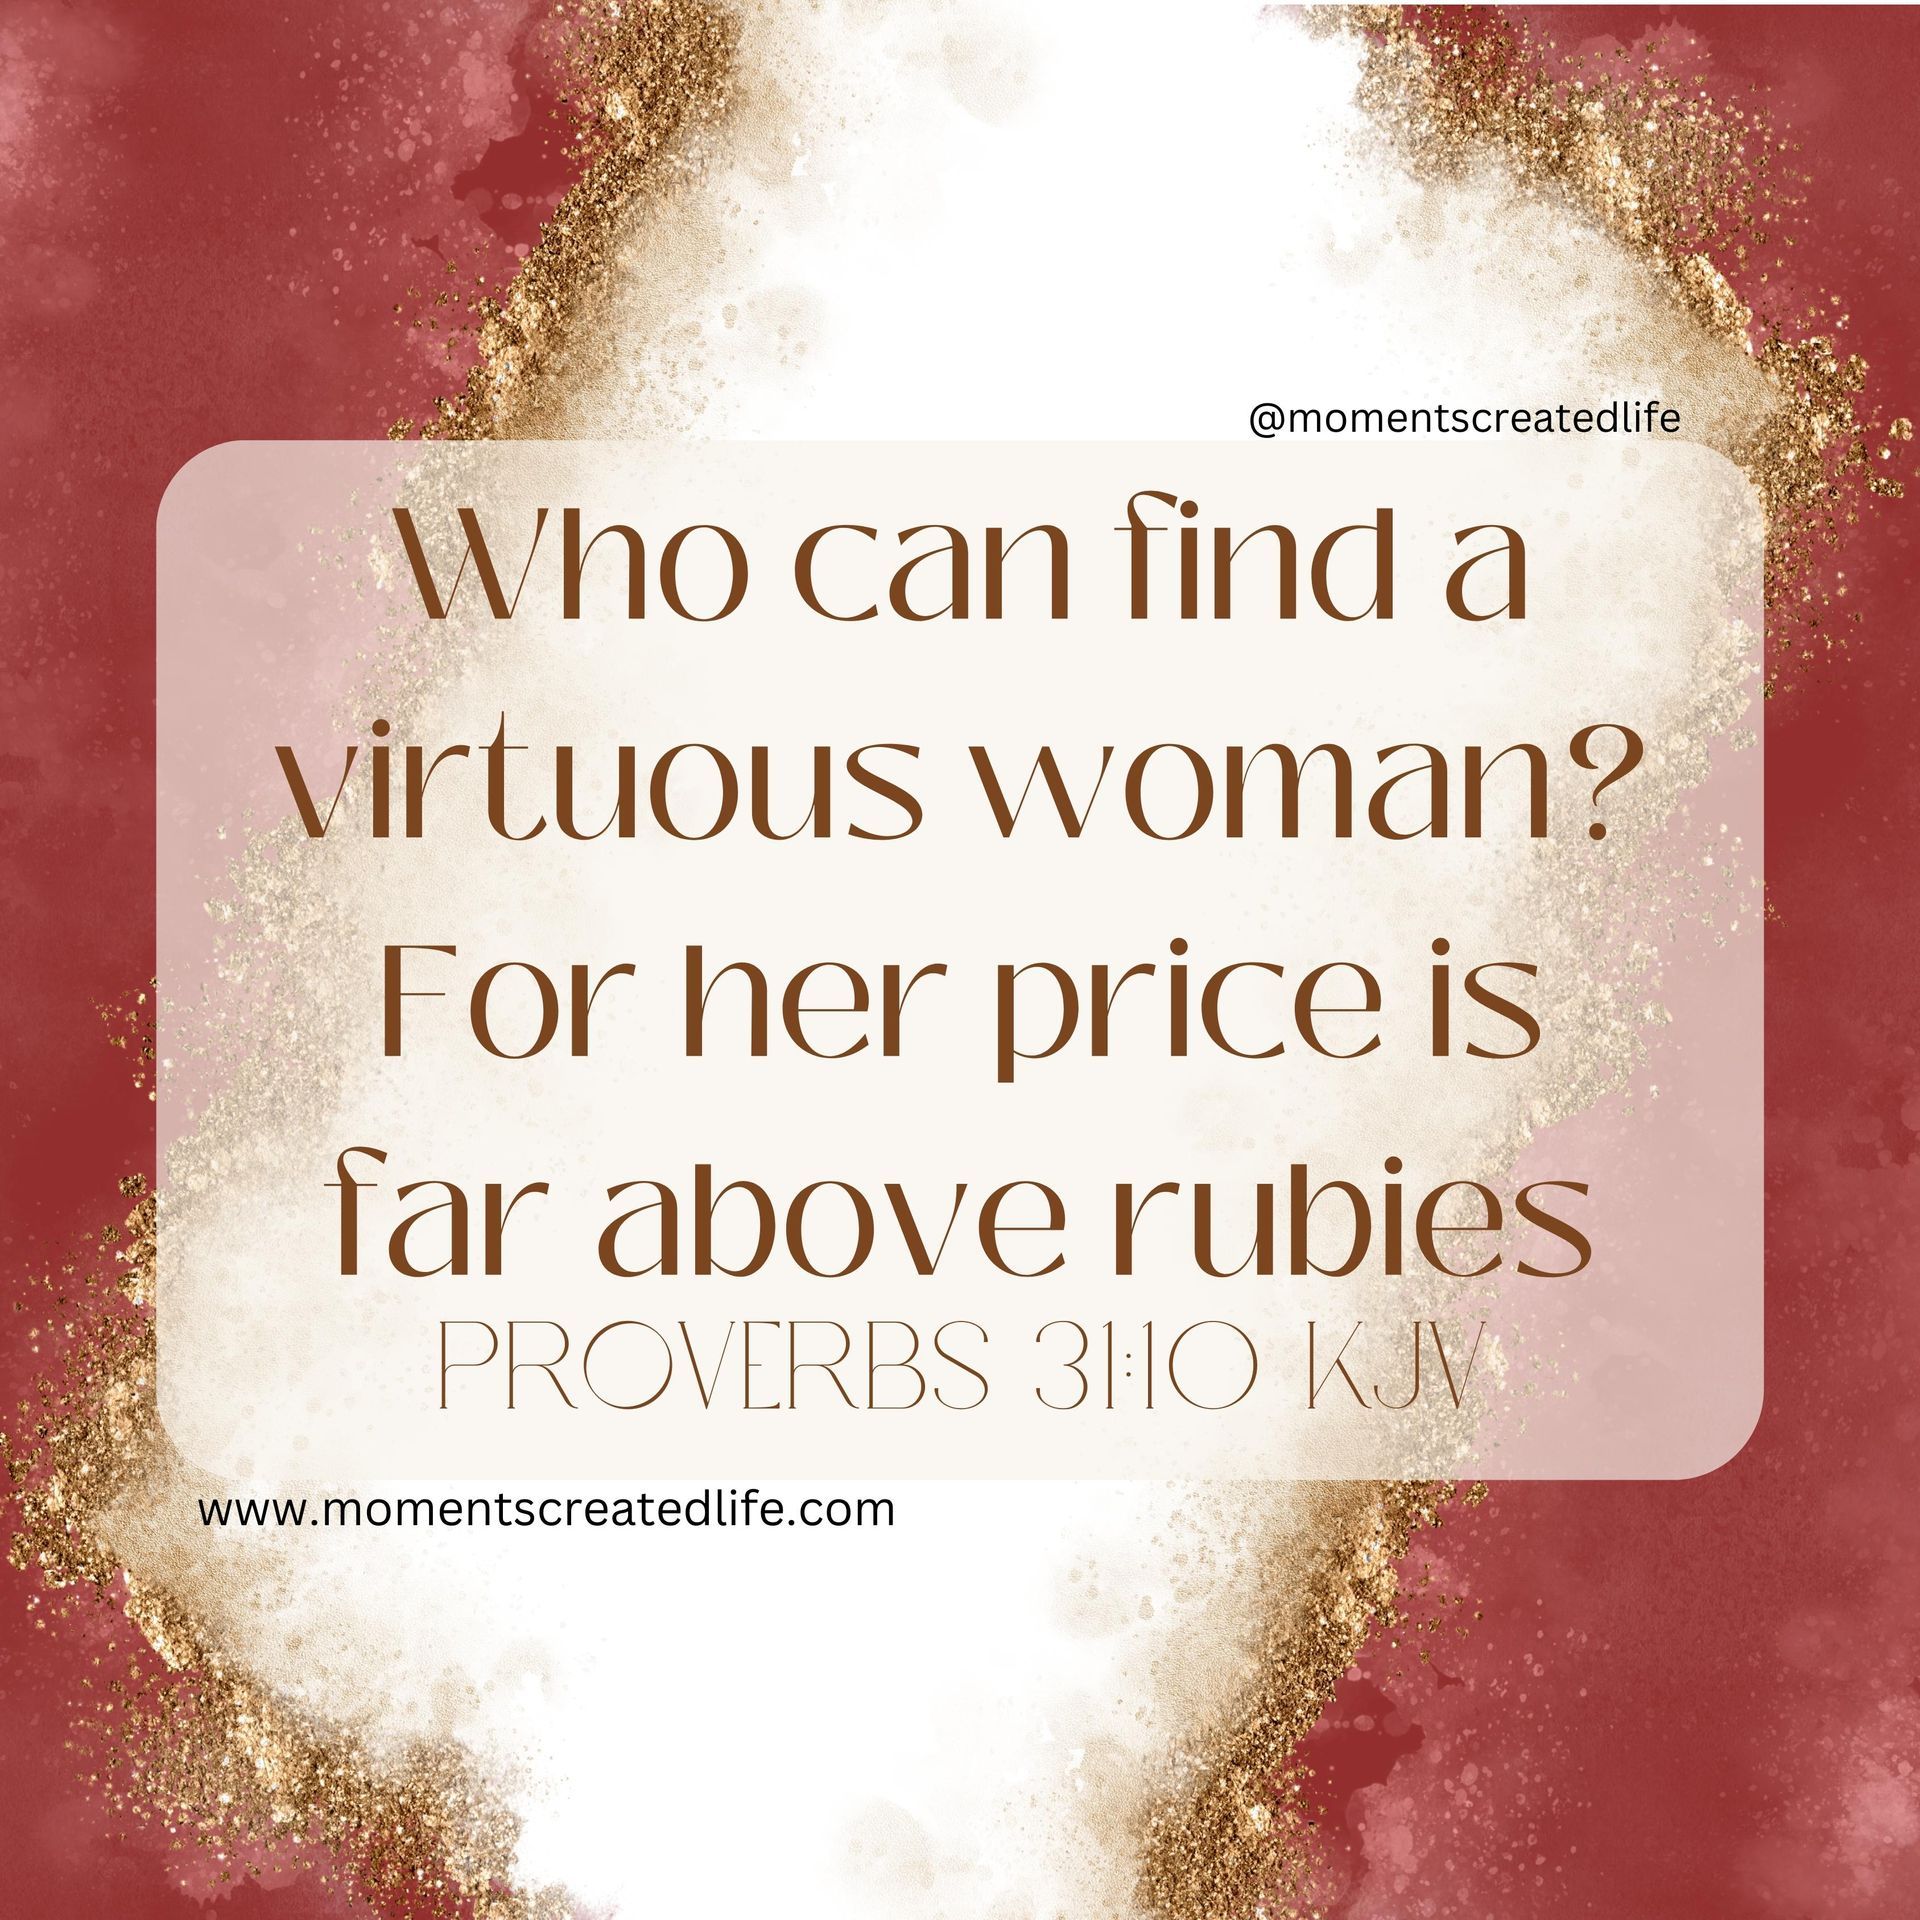 What is a Proverbs 31 Woman?